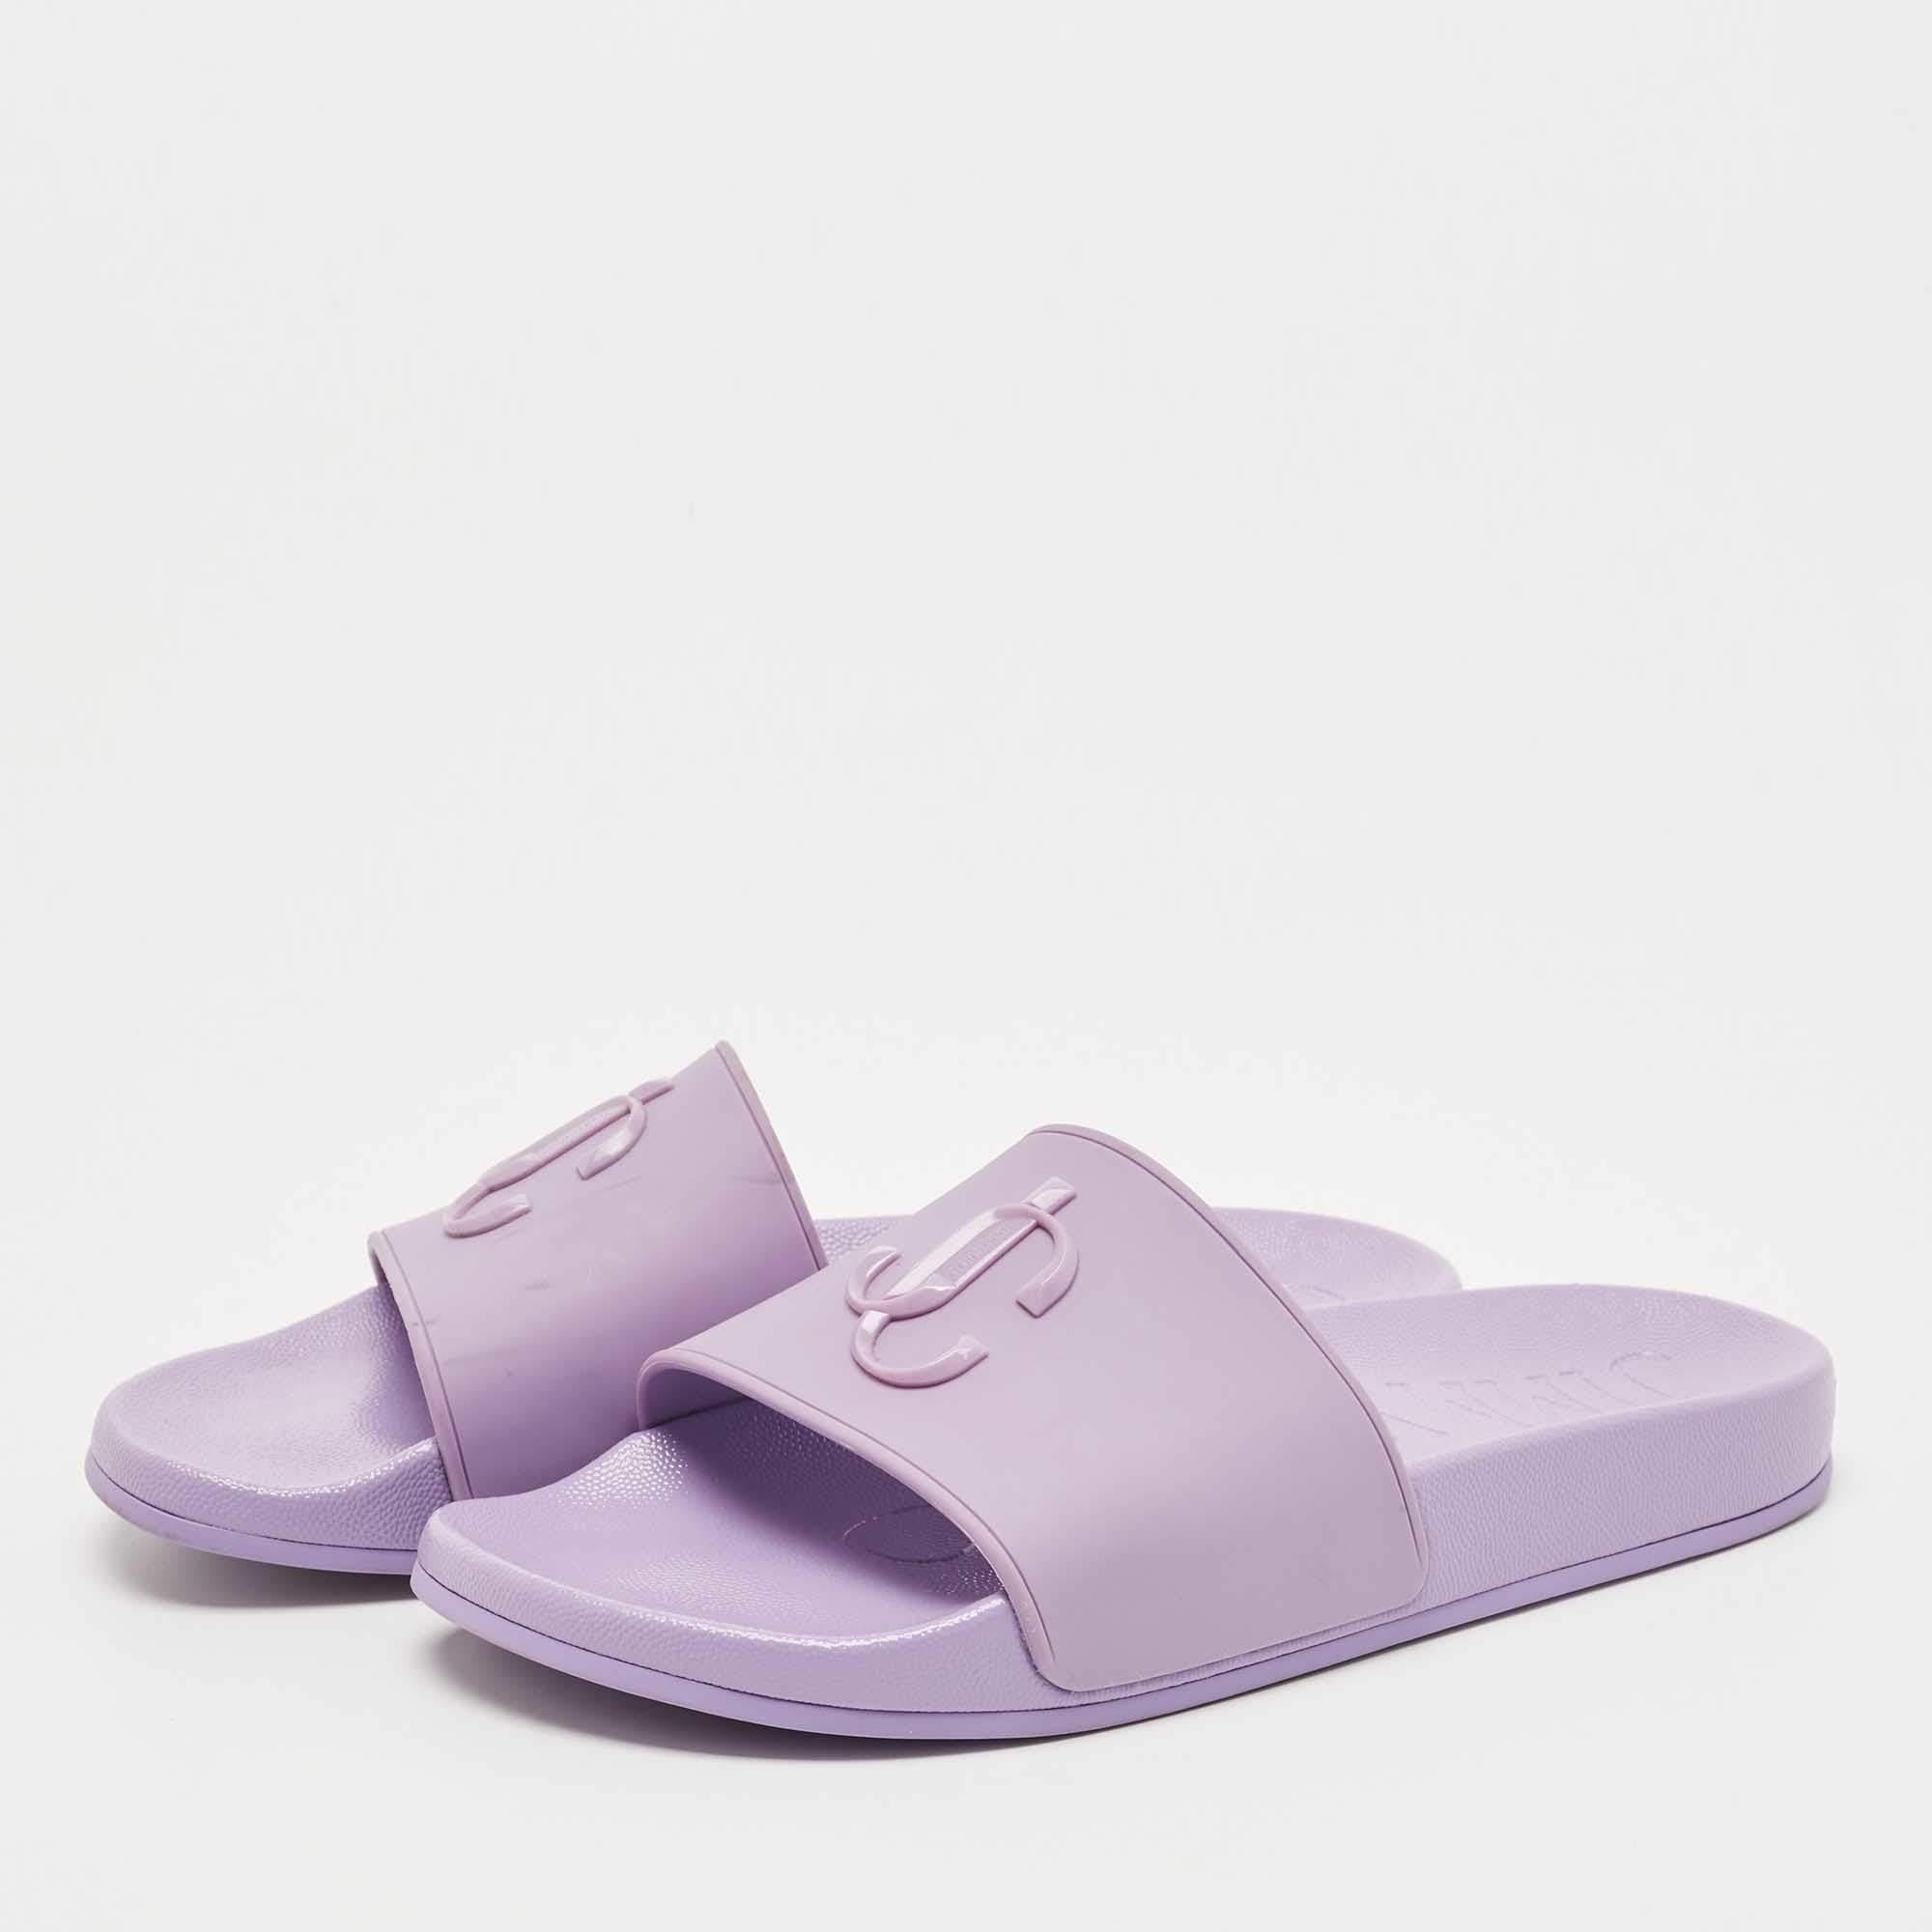 Jimmy Choo's rubber slides for women have the JC branding on the uppers. They're perfect for the beach, vacation days, or everyday use.

